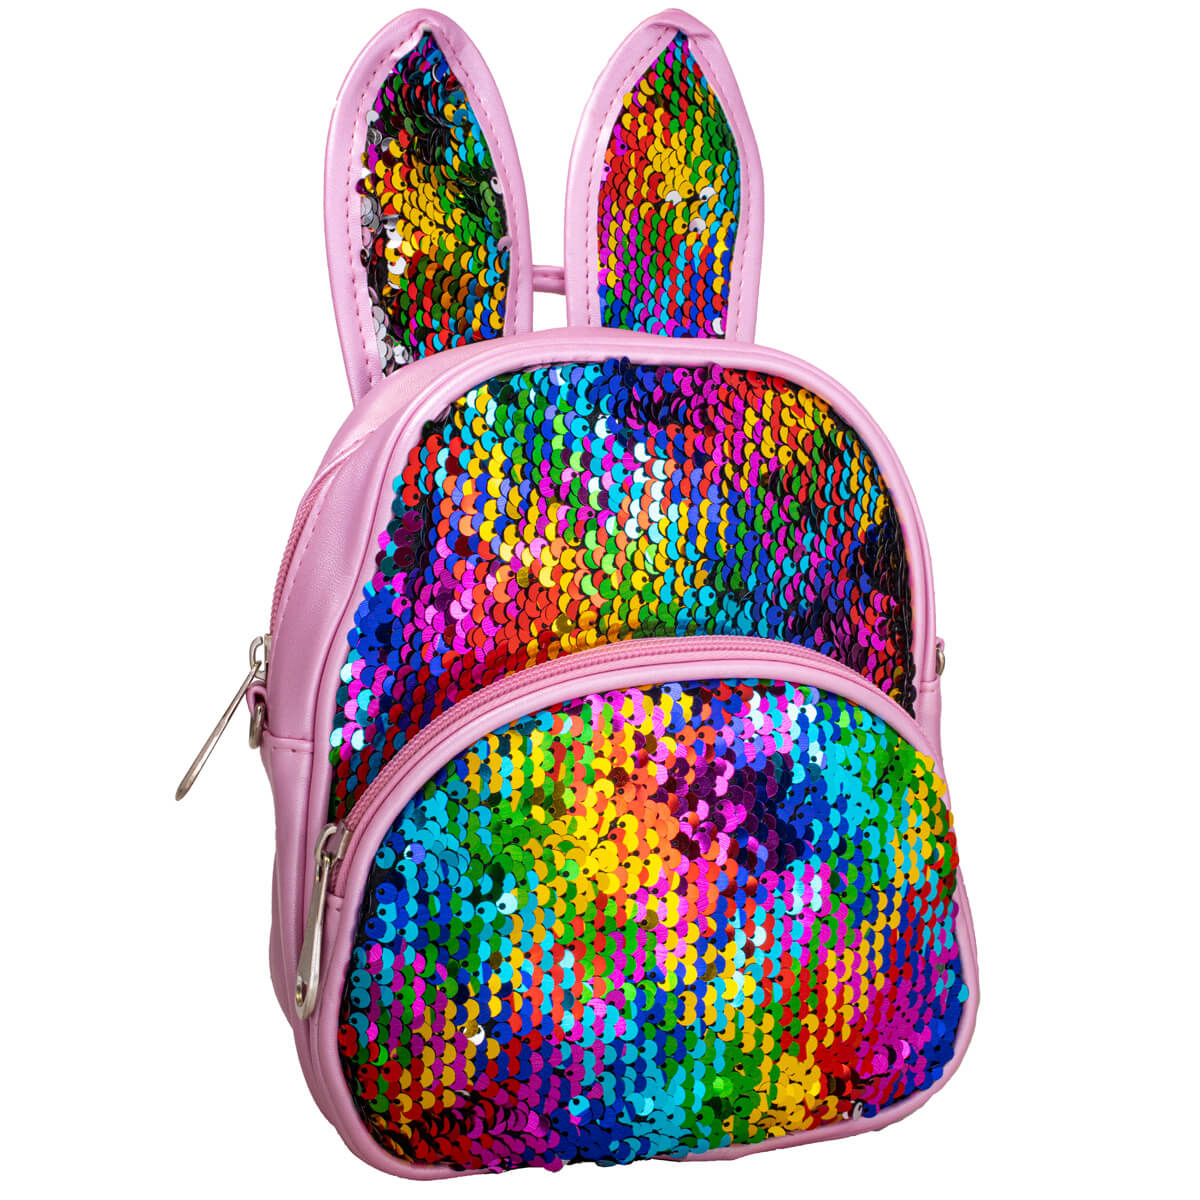 Children's backpack - a small sequin bunny backpack